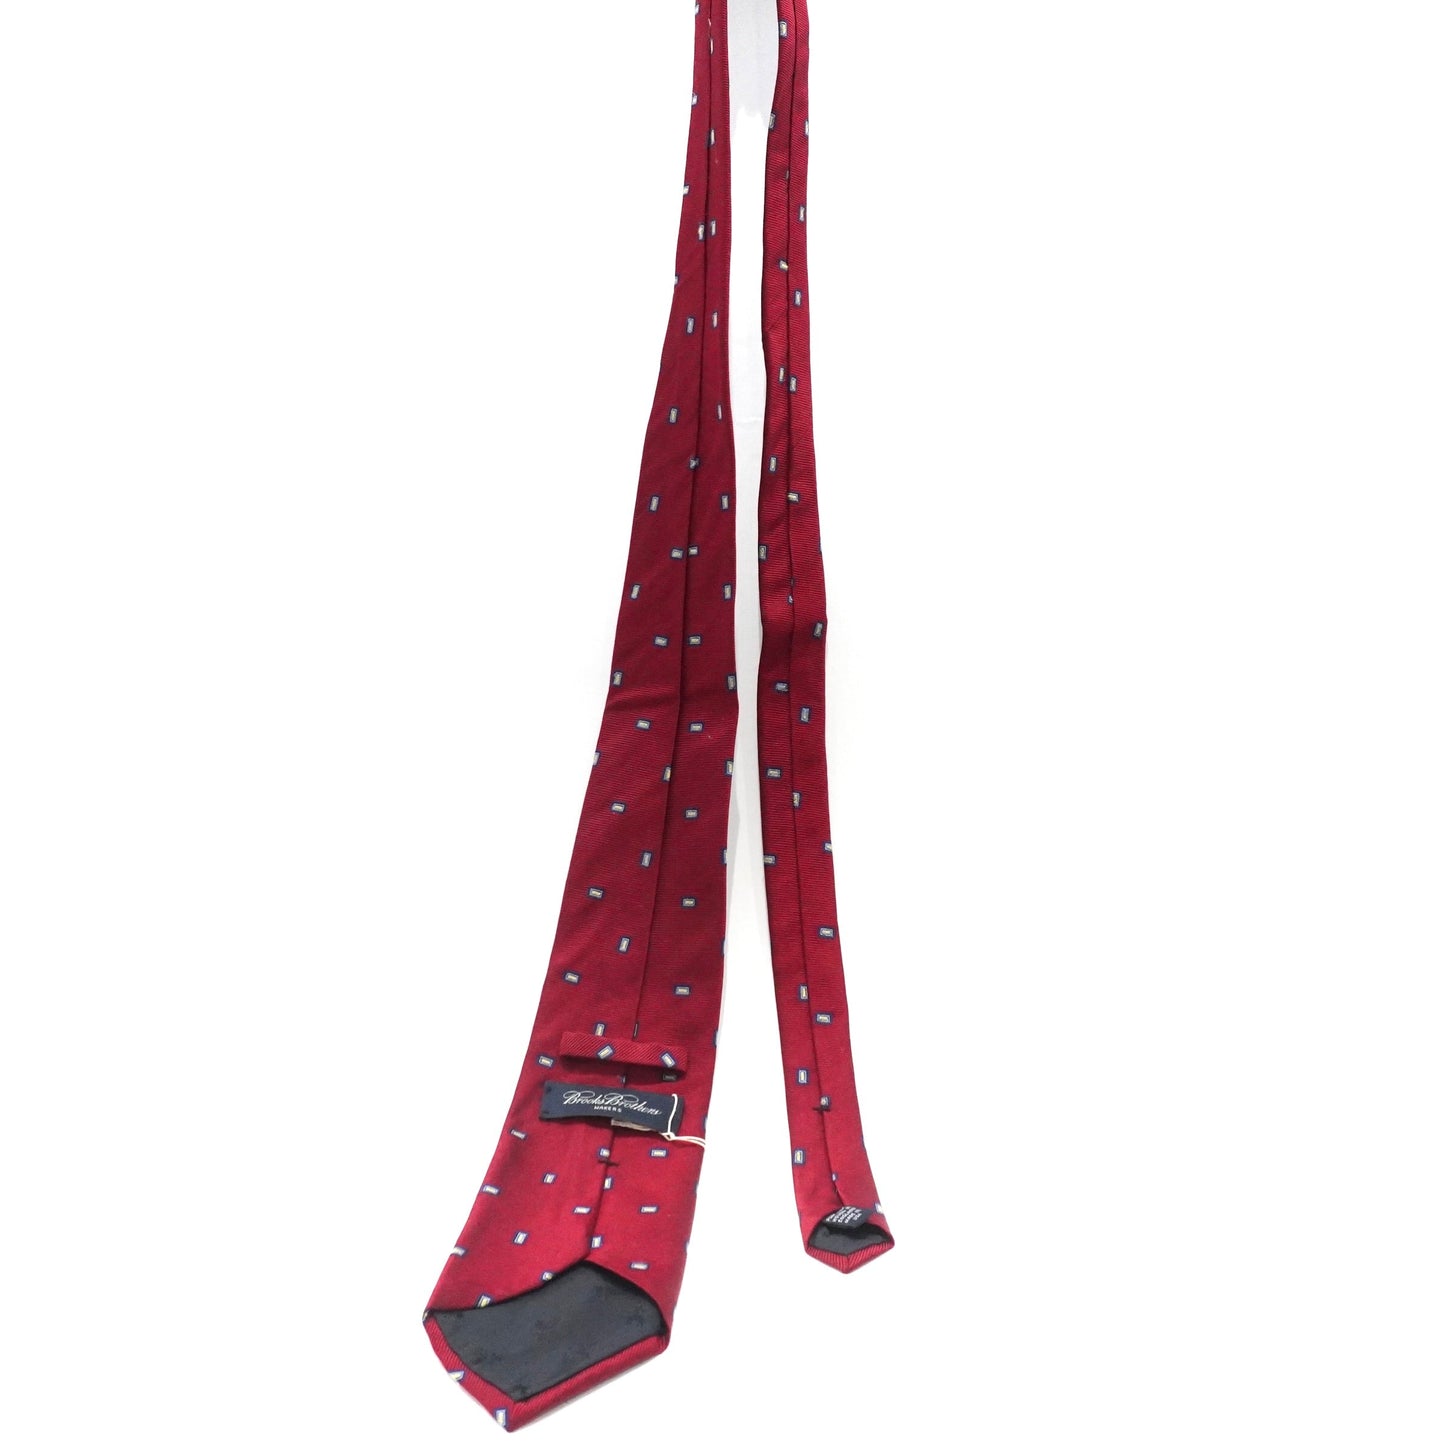 [BROOKS BROTHERS] OLD SMALL CREST TIE RED ネクタイ - #shop_name #アパルティール# #名古屋# #セレクトショップ#